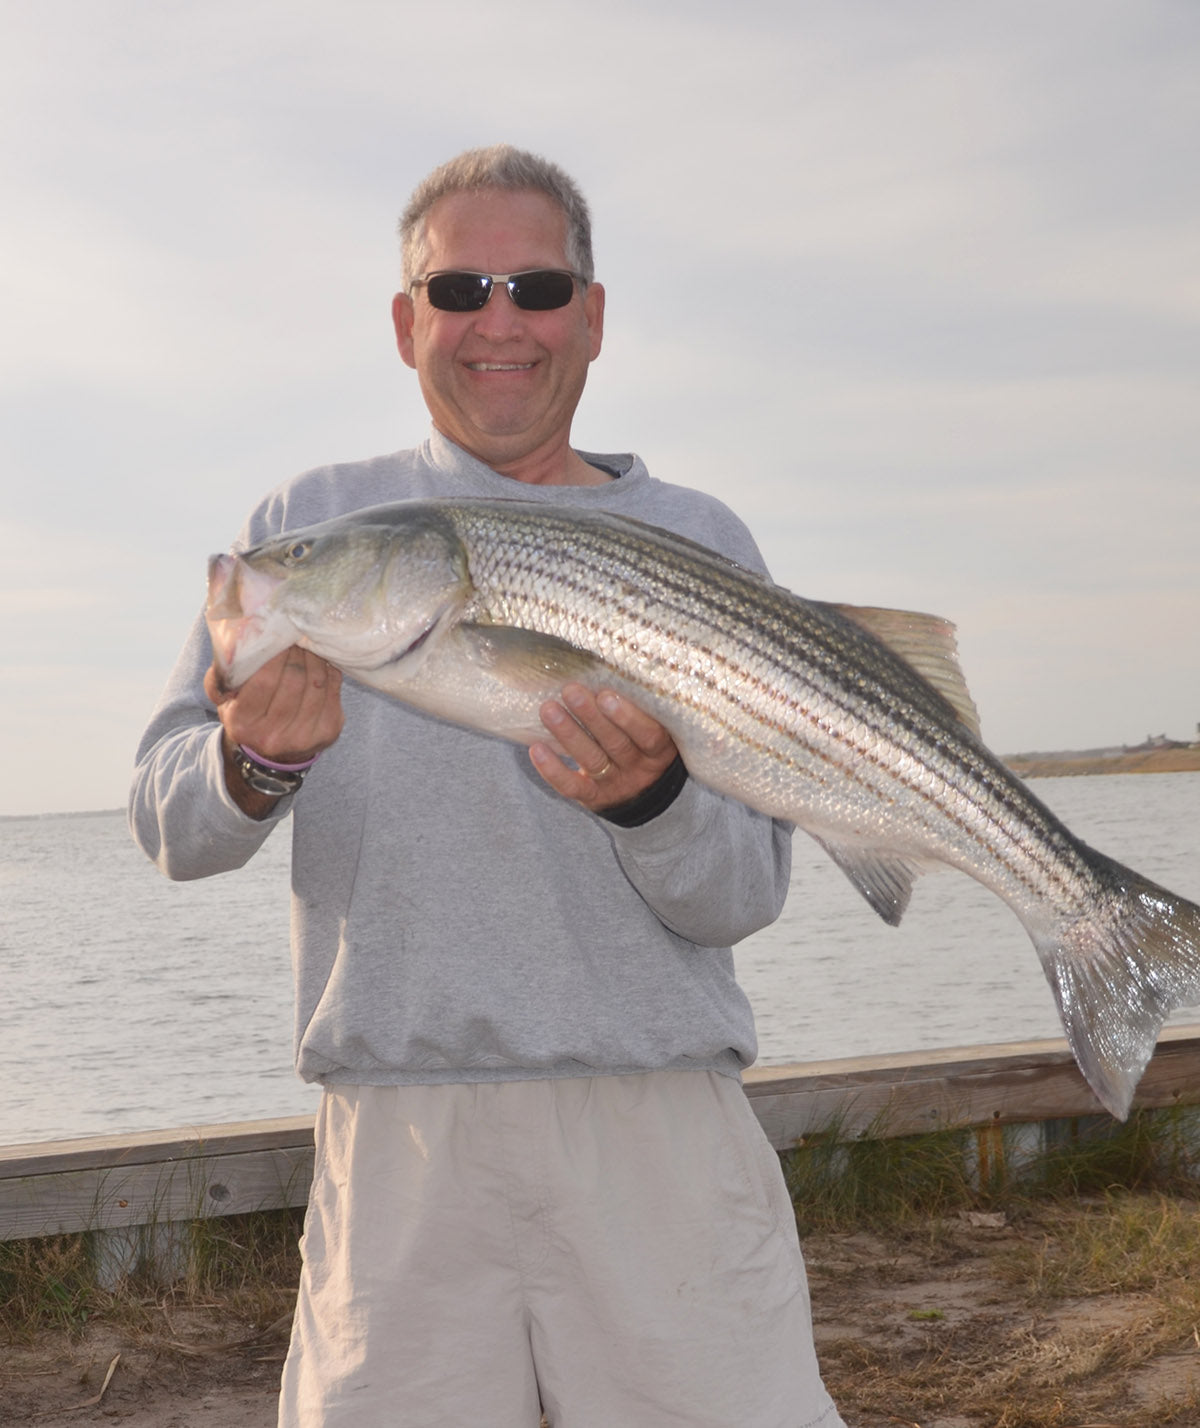 It’s not always small fish that come up for anglers while fishing the piers or docks. 